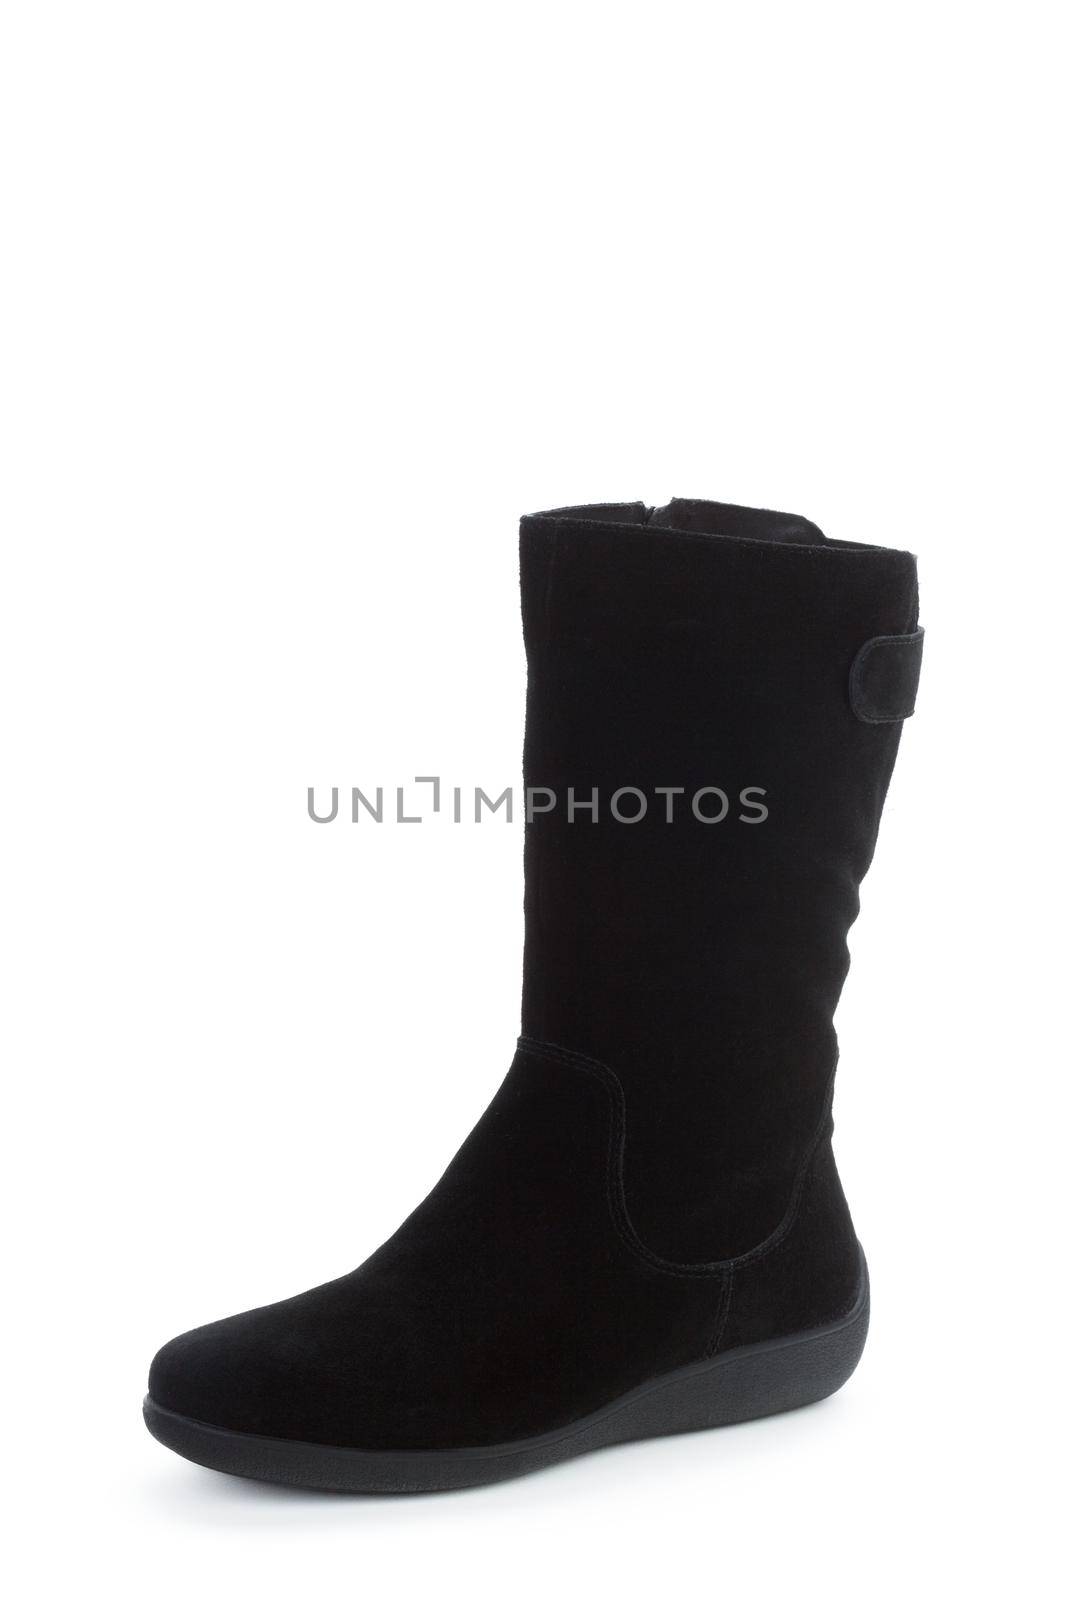 Winter female leather boots isolated on white background by Fabrikasimf